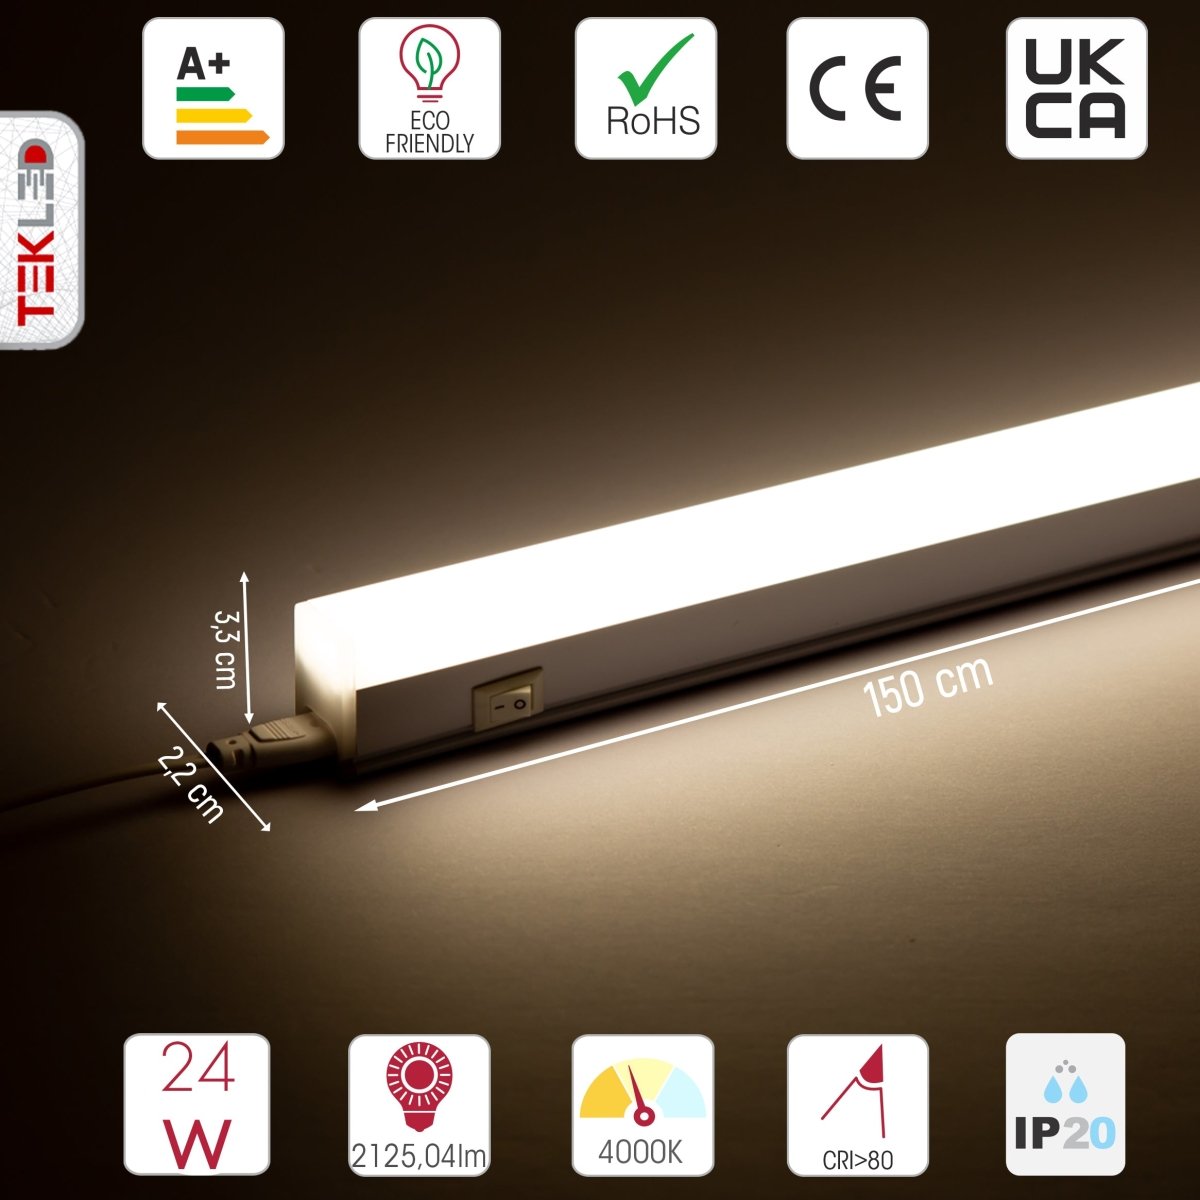 Technical specs and measurements for LED T5 Under Cabinet Link Light 24W 4000K Cool White IP20 with switch 150cm 5ft